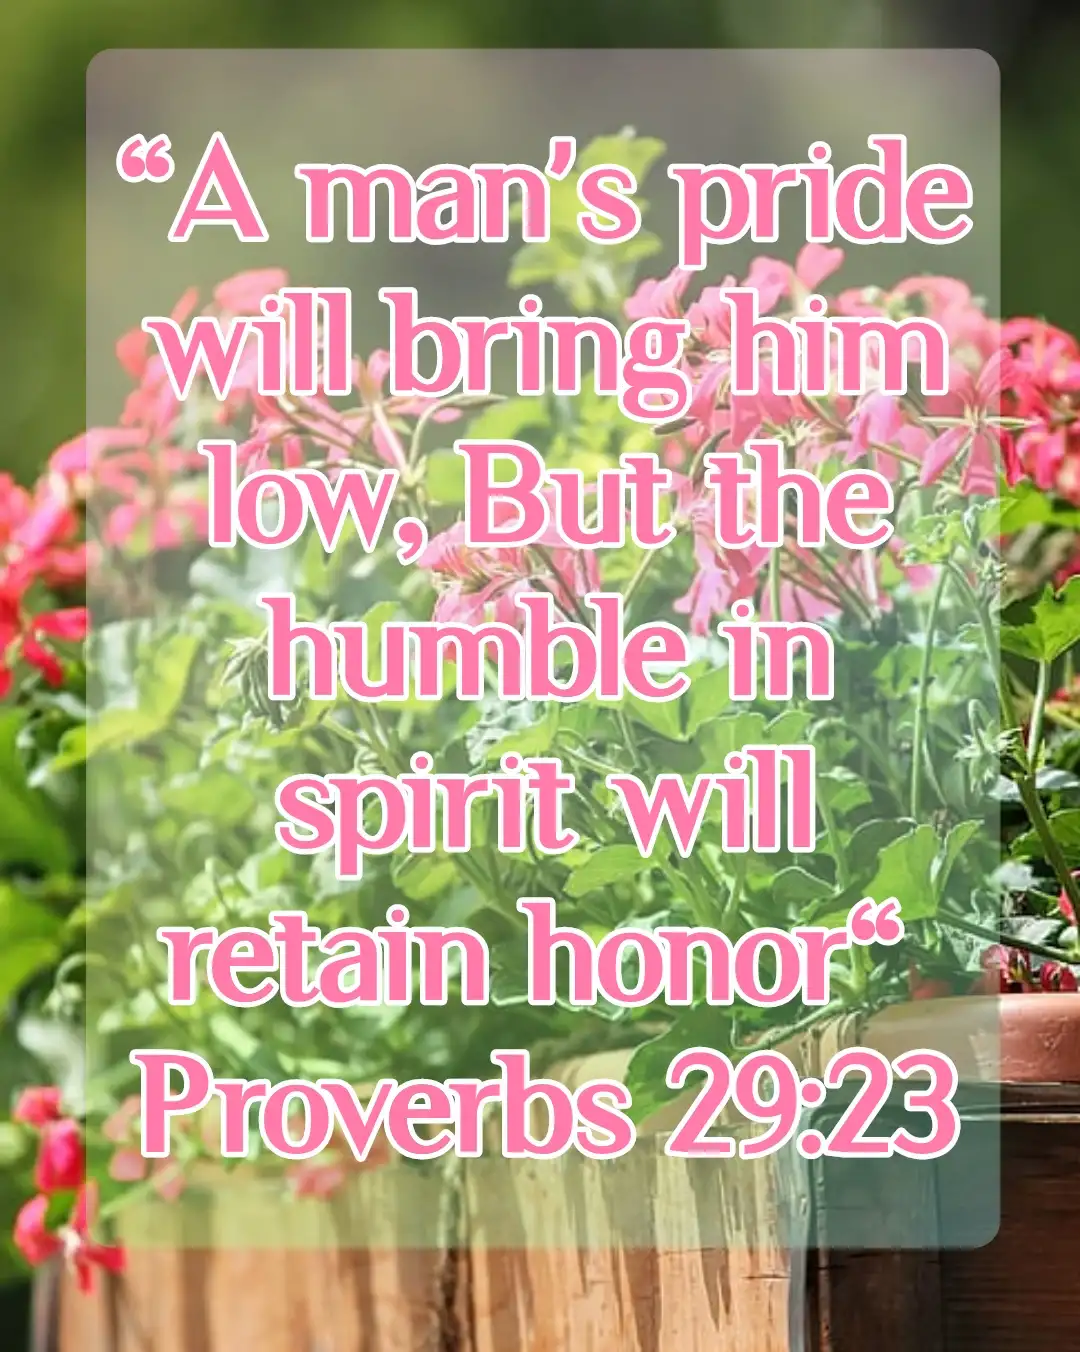 bible-verses-about-pride (Proverbs 29:23)